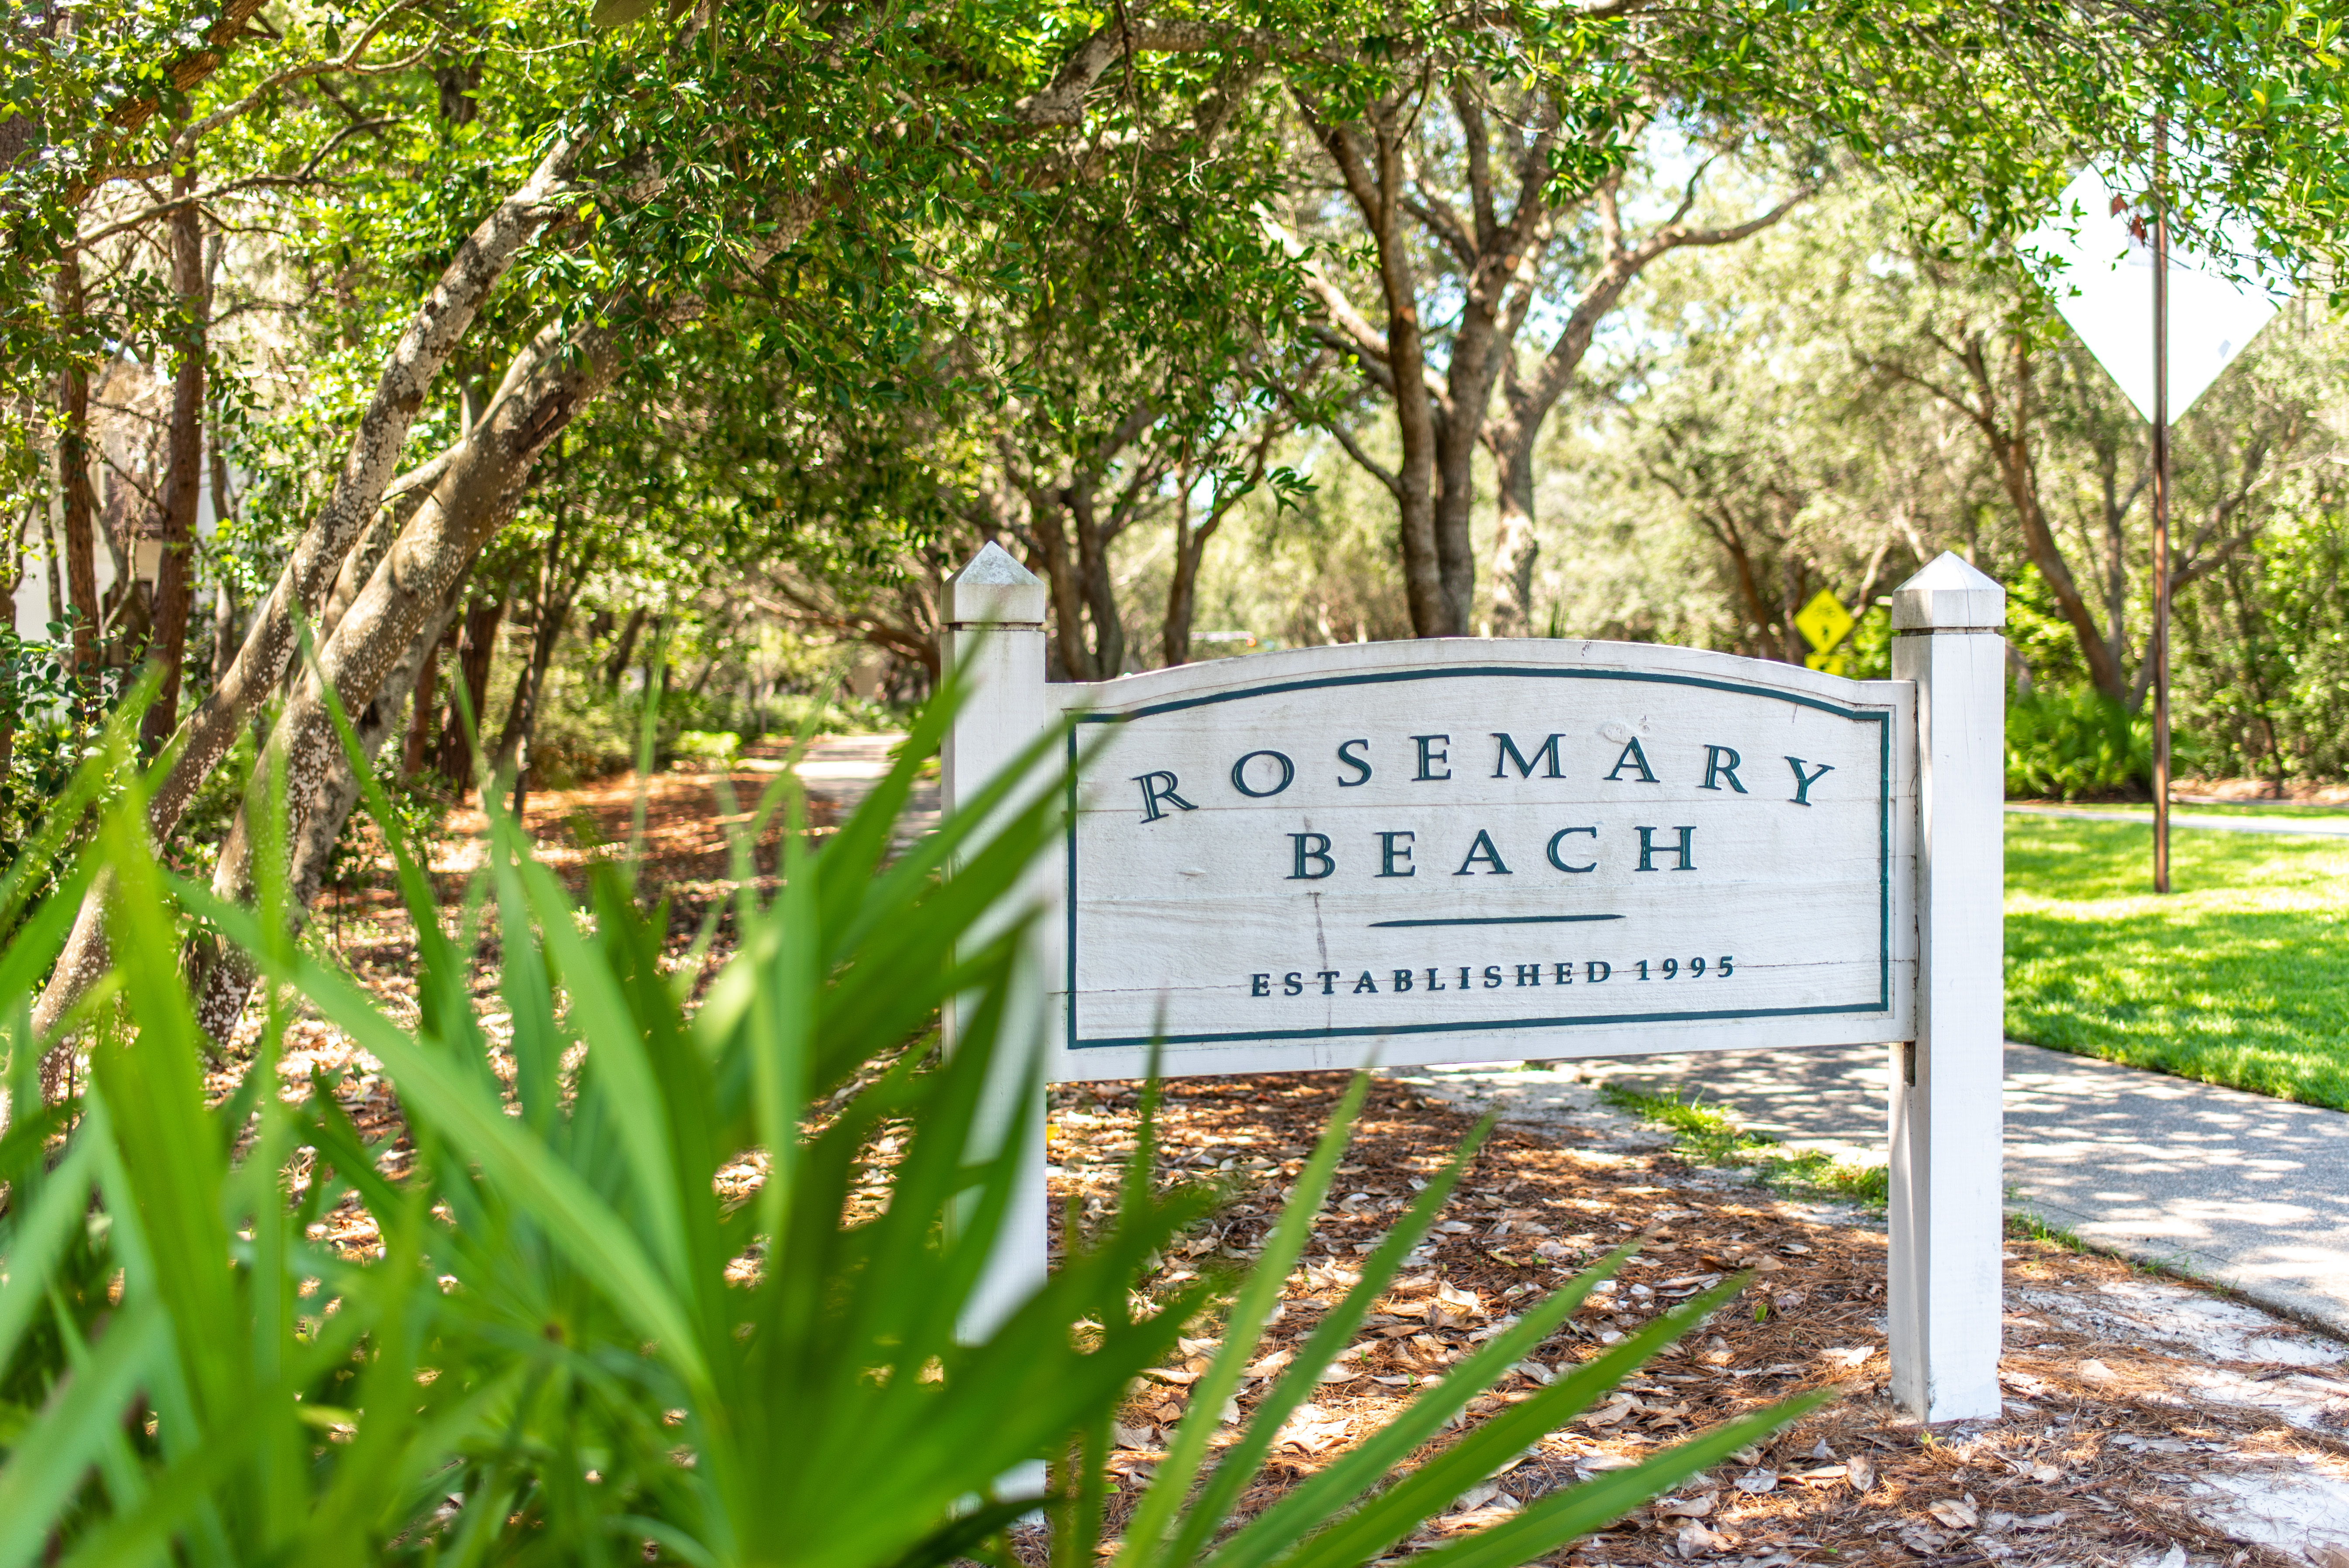 The Rosemary Beach town sign along the oak lined street